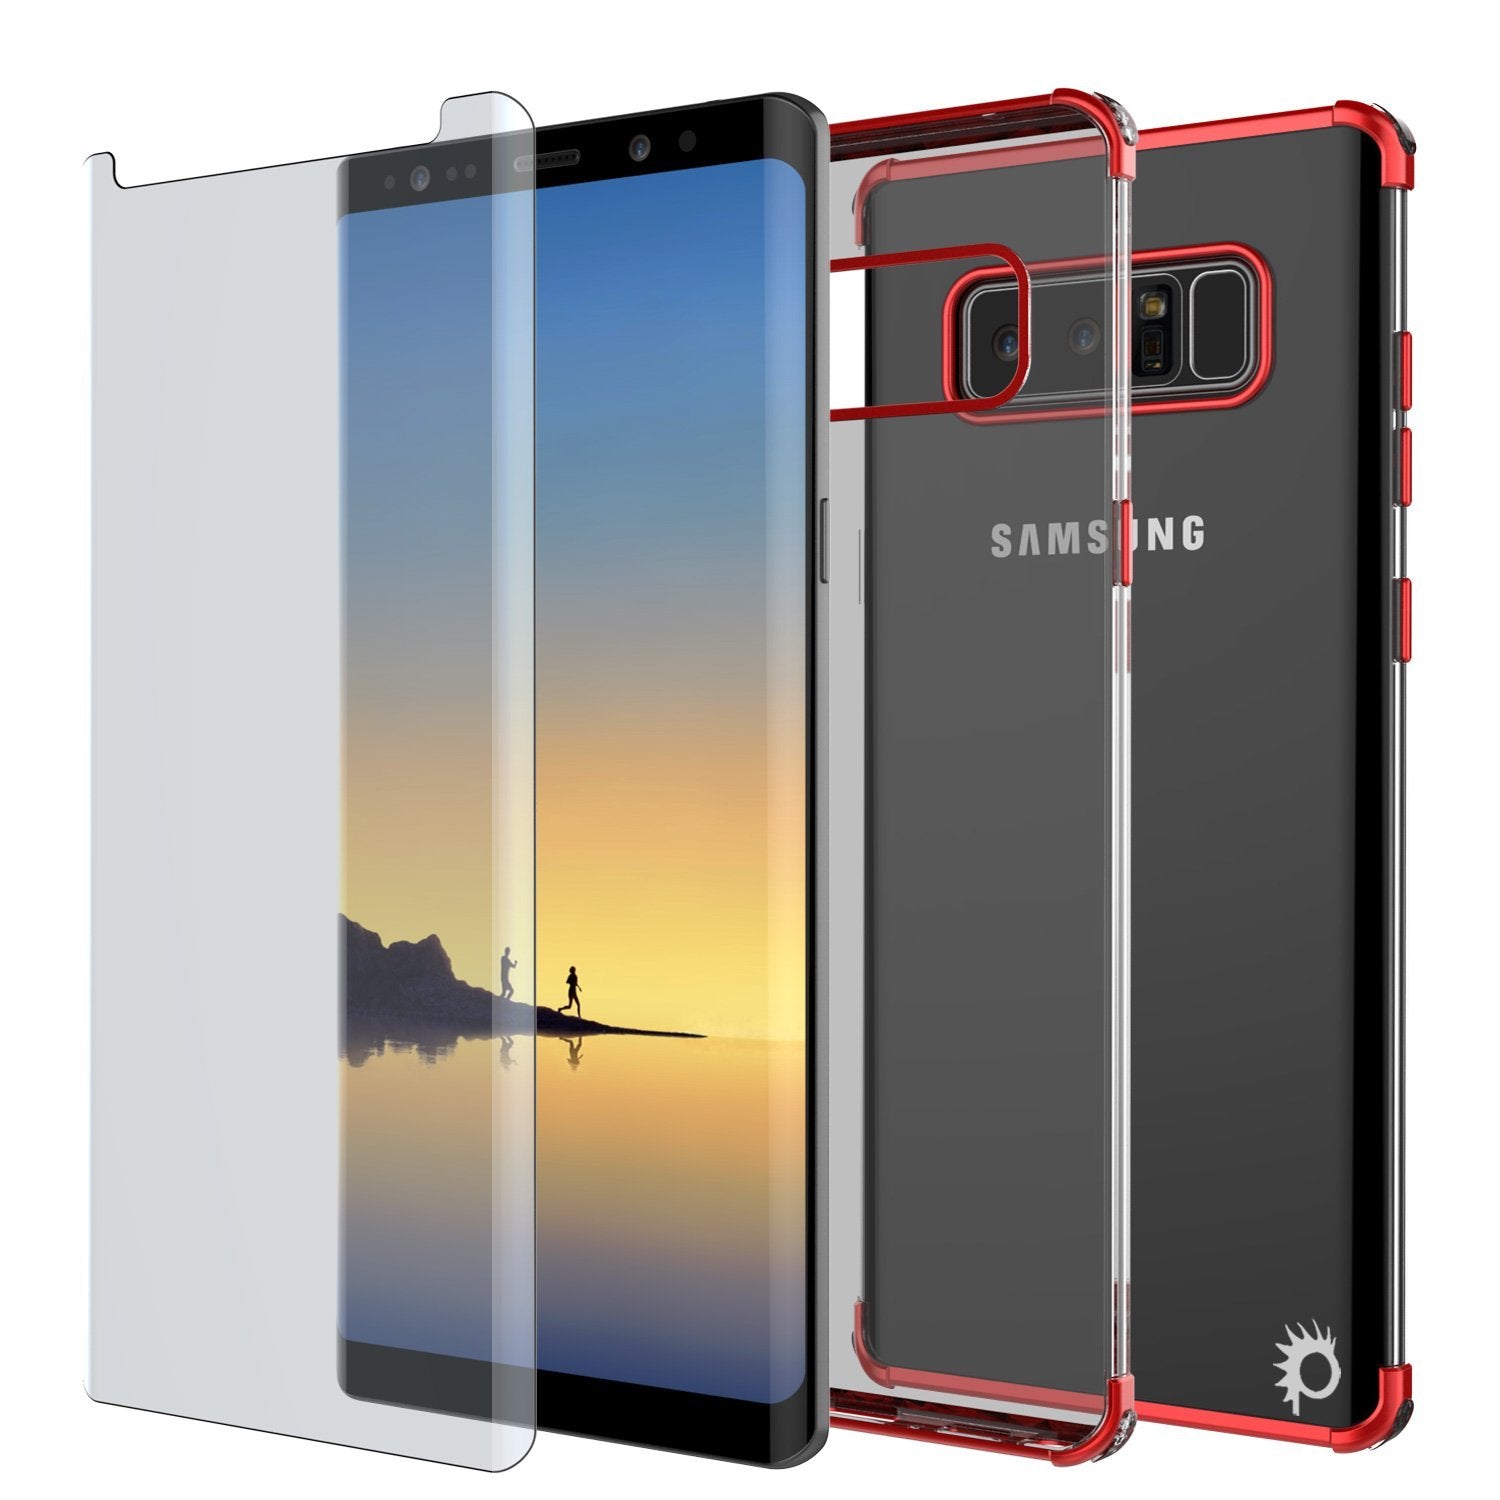 Galaxy Note 8 Punkcase Slim-Fit Case W/ Screen Protector Cover [Red]